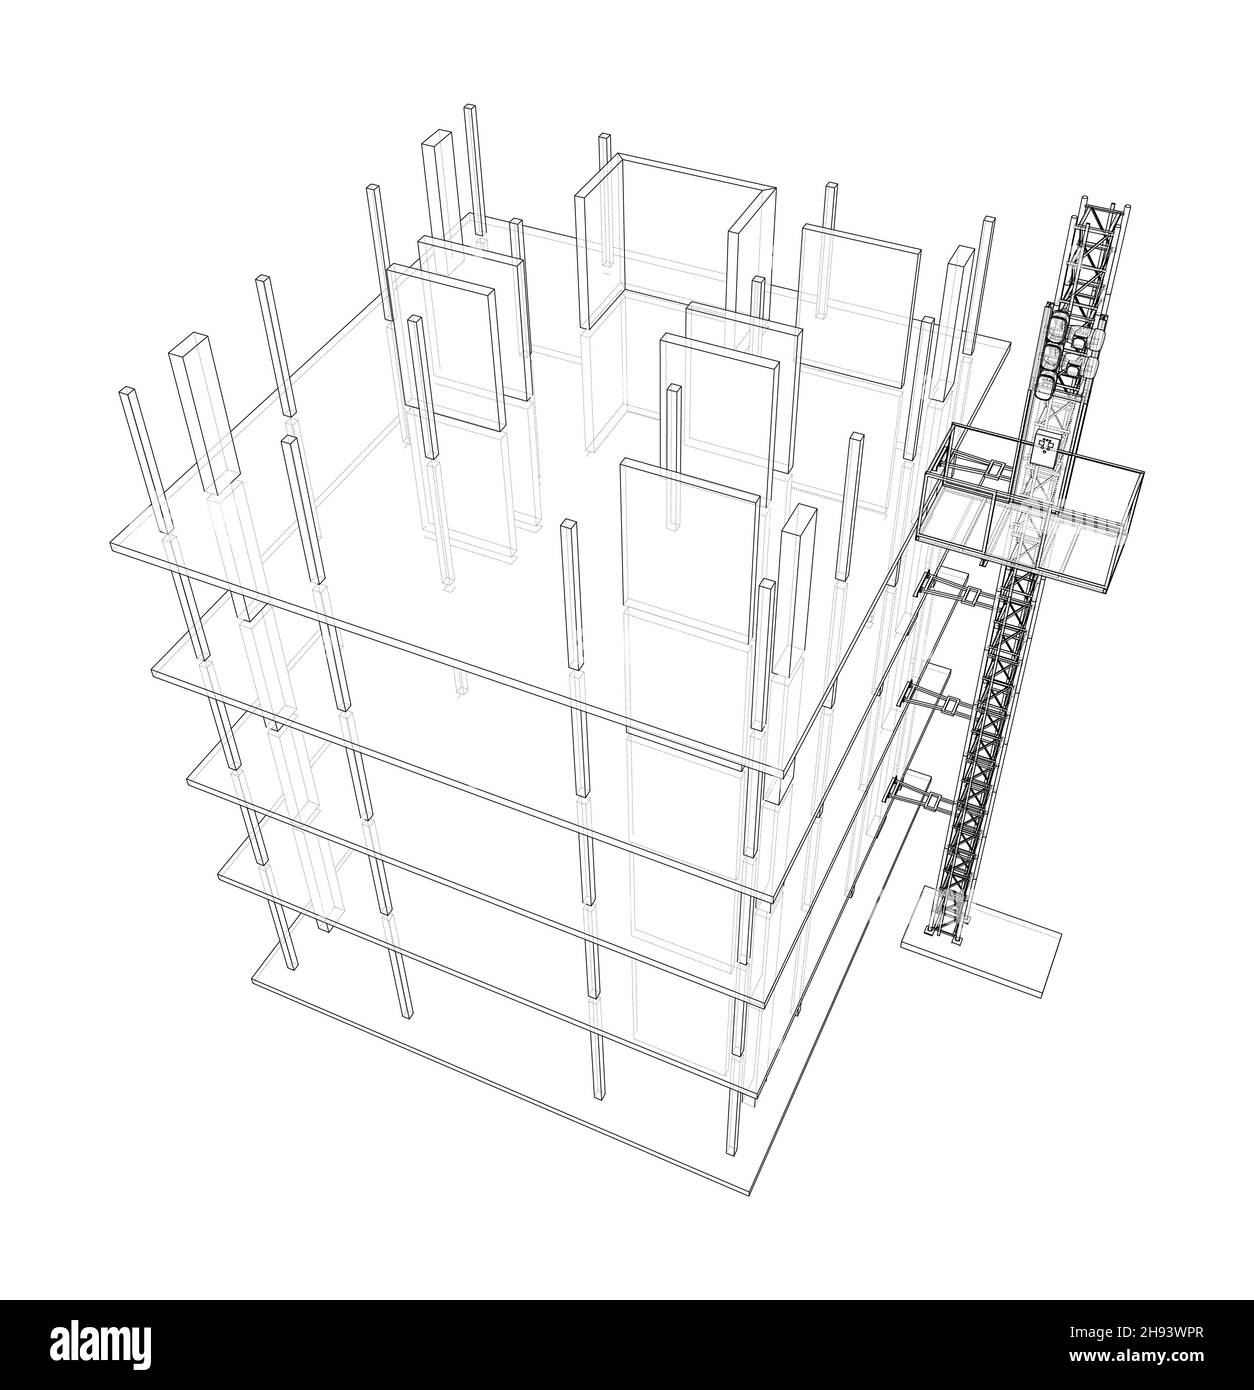 Building under construction with mast lifts Stock Photo